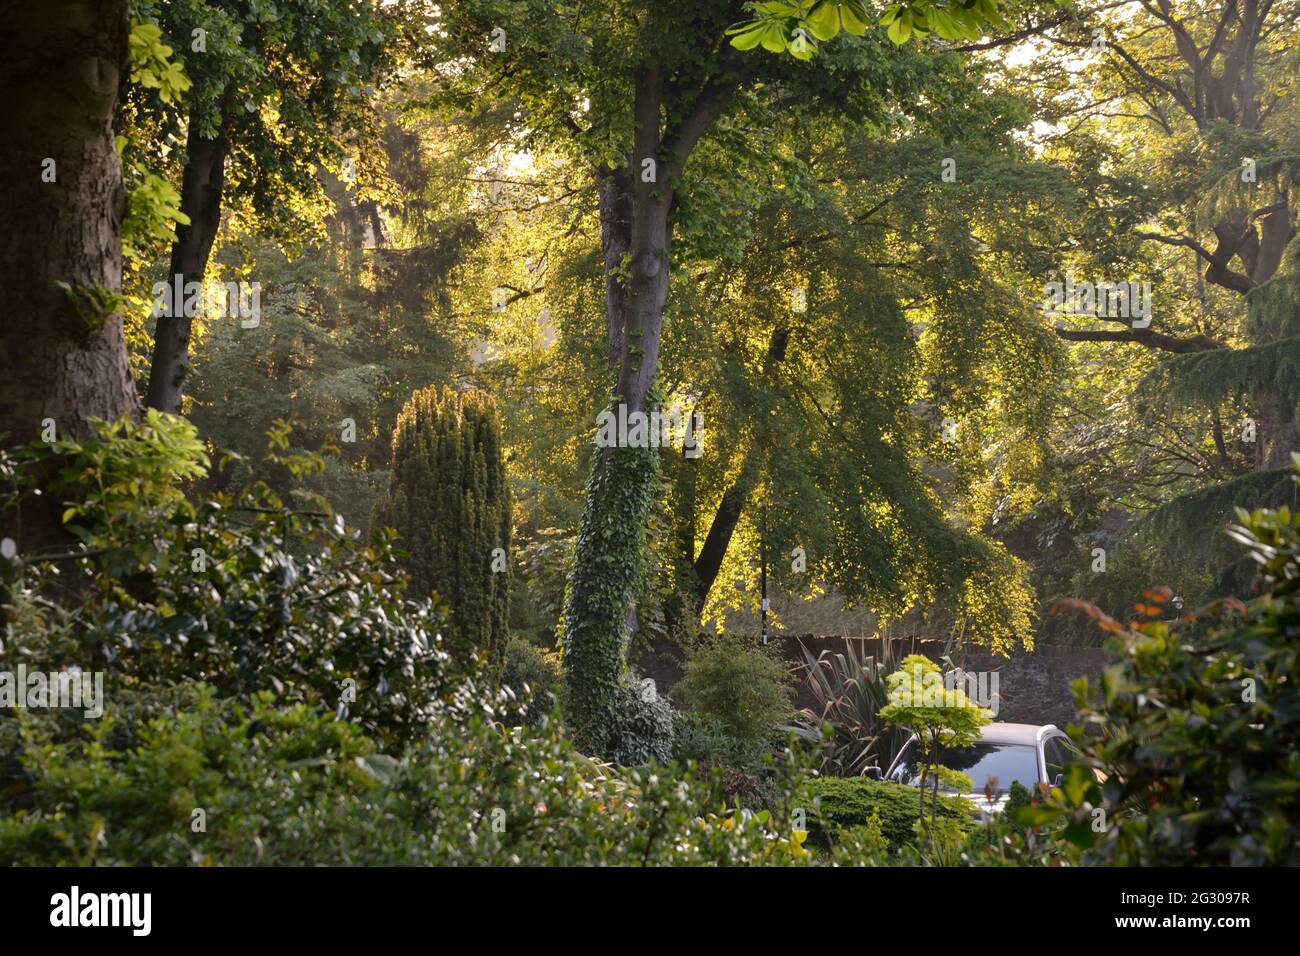 Lush green and gardens at Nether Edge in suburban Sheffield, England Stock Photo